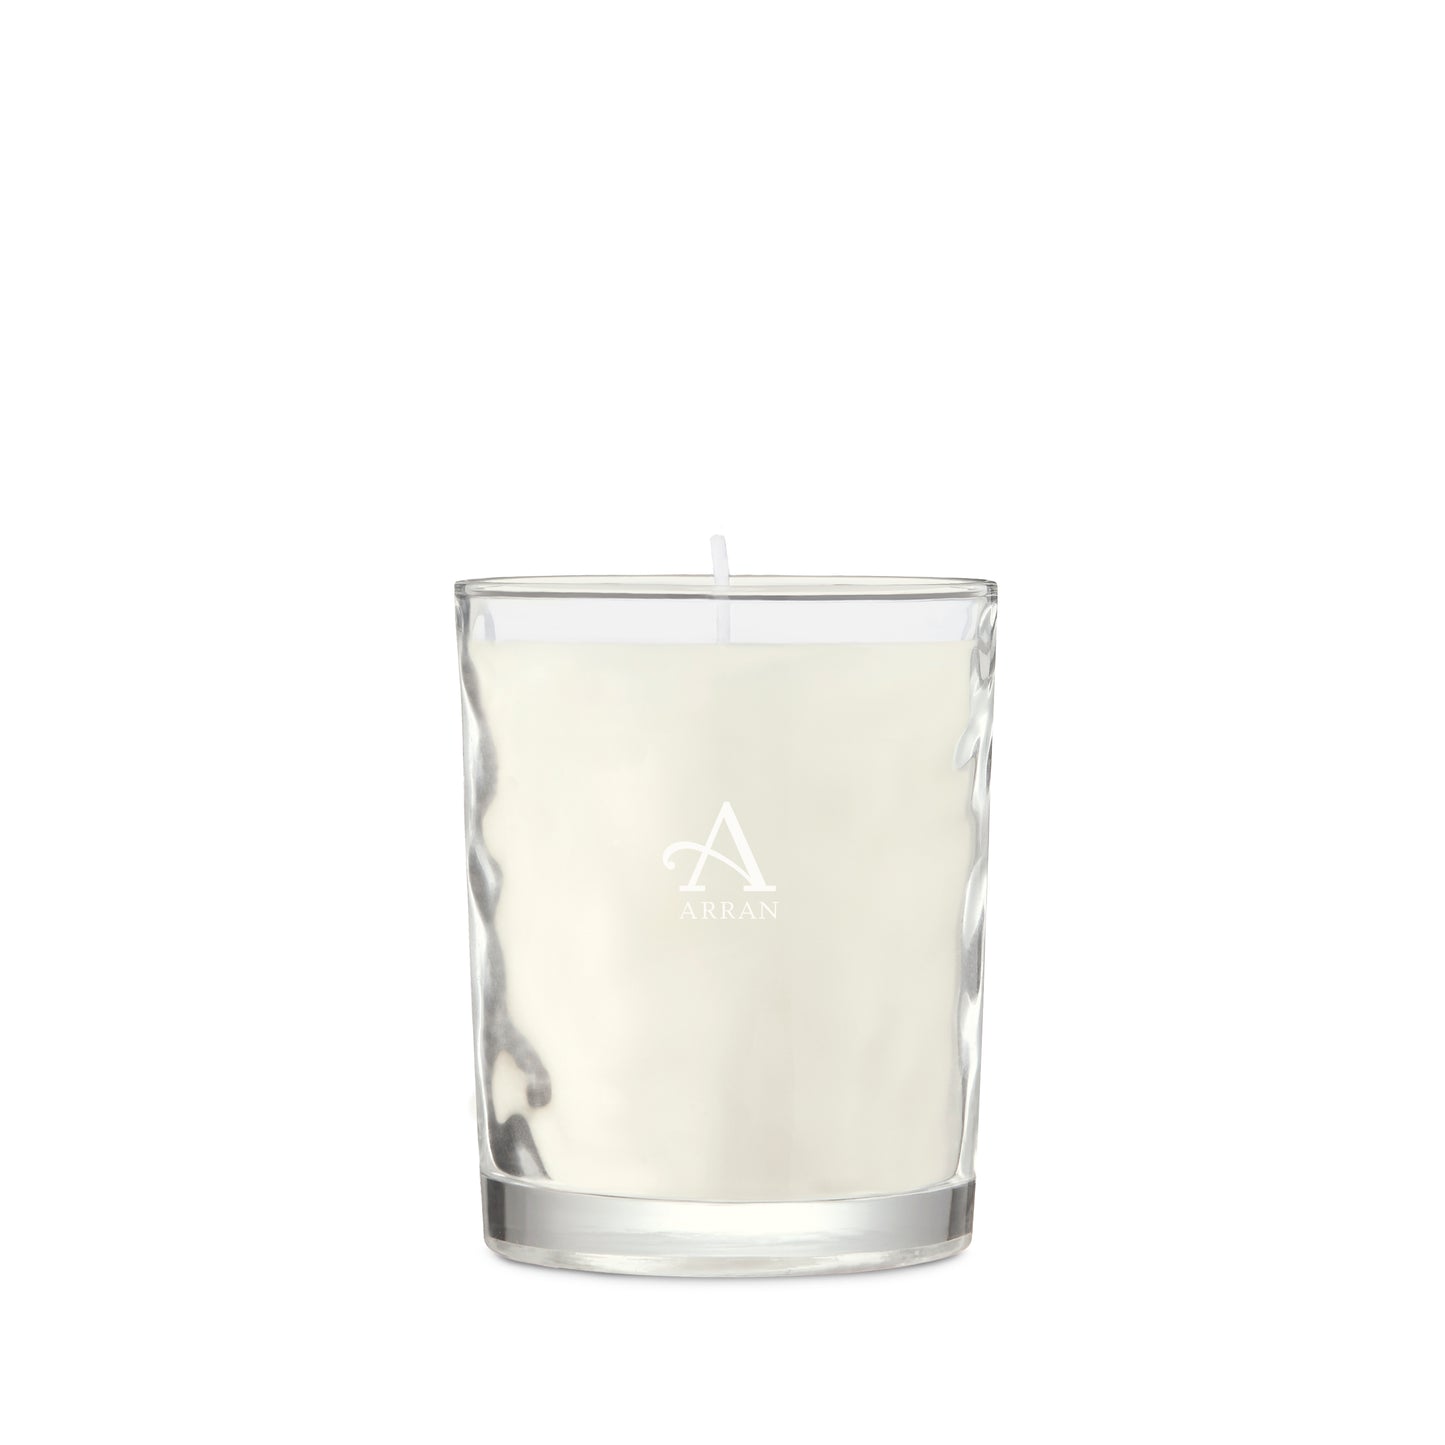 Cedarwood and Citrus Candle 8cl